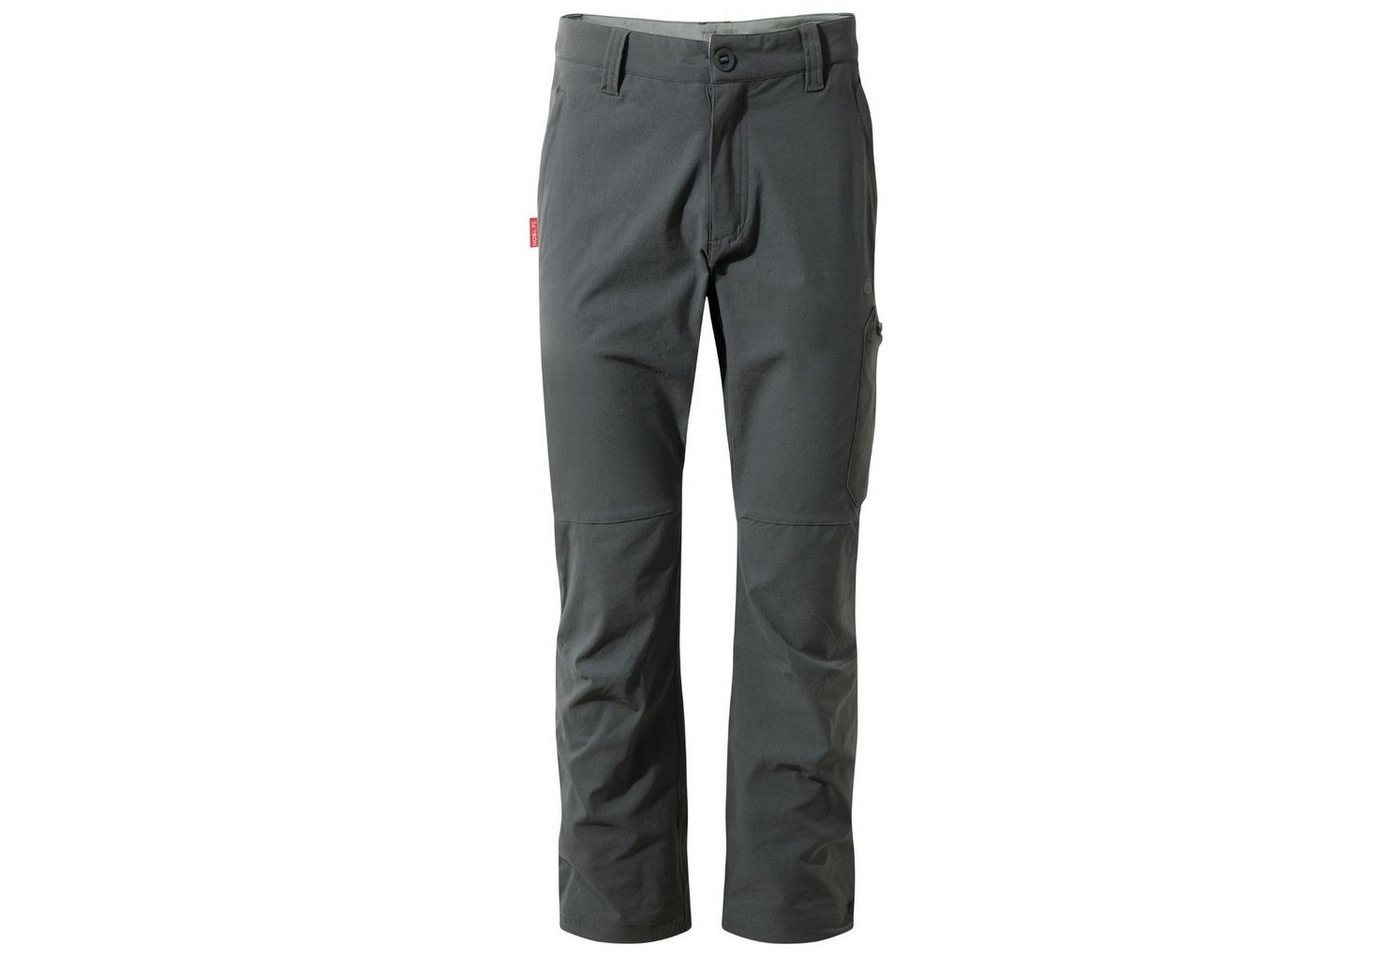 Craghoppers Sporthose »Craghoppers NosiLife Herren Adventure Pro Trousers Outdoor Tropen Hose Insektenabweisend« von Craghoppers